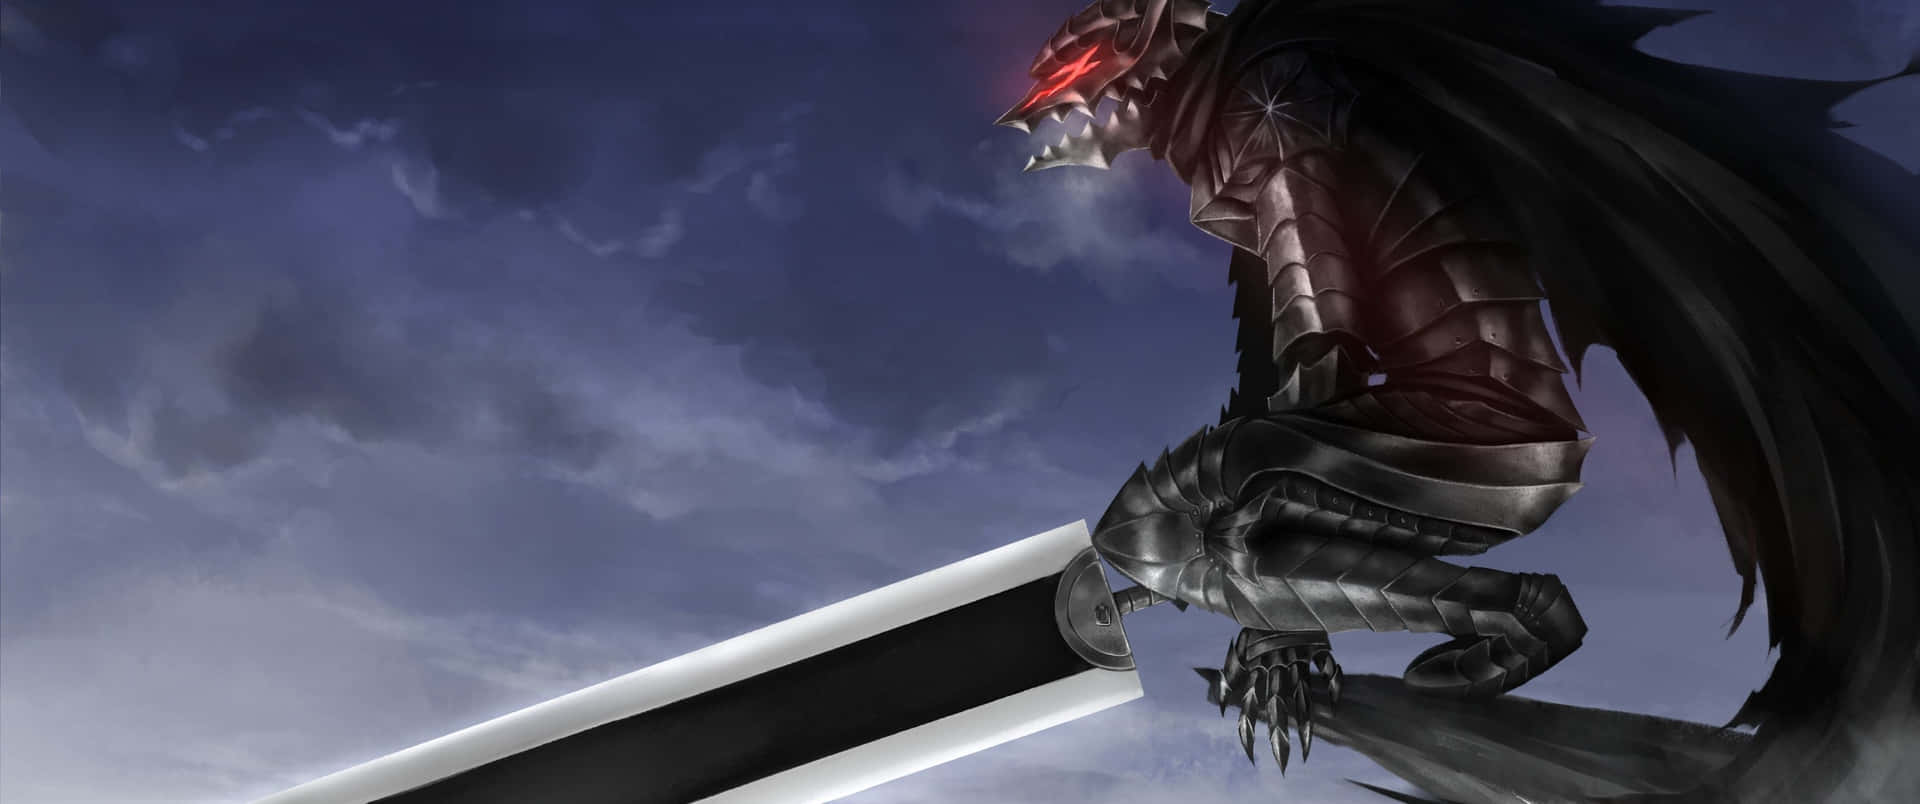 Check Out The Eerie Berserk Armor Wallpaper